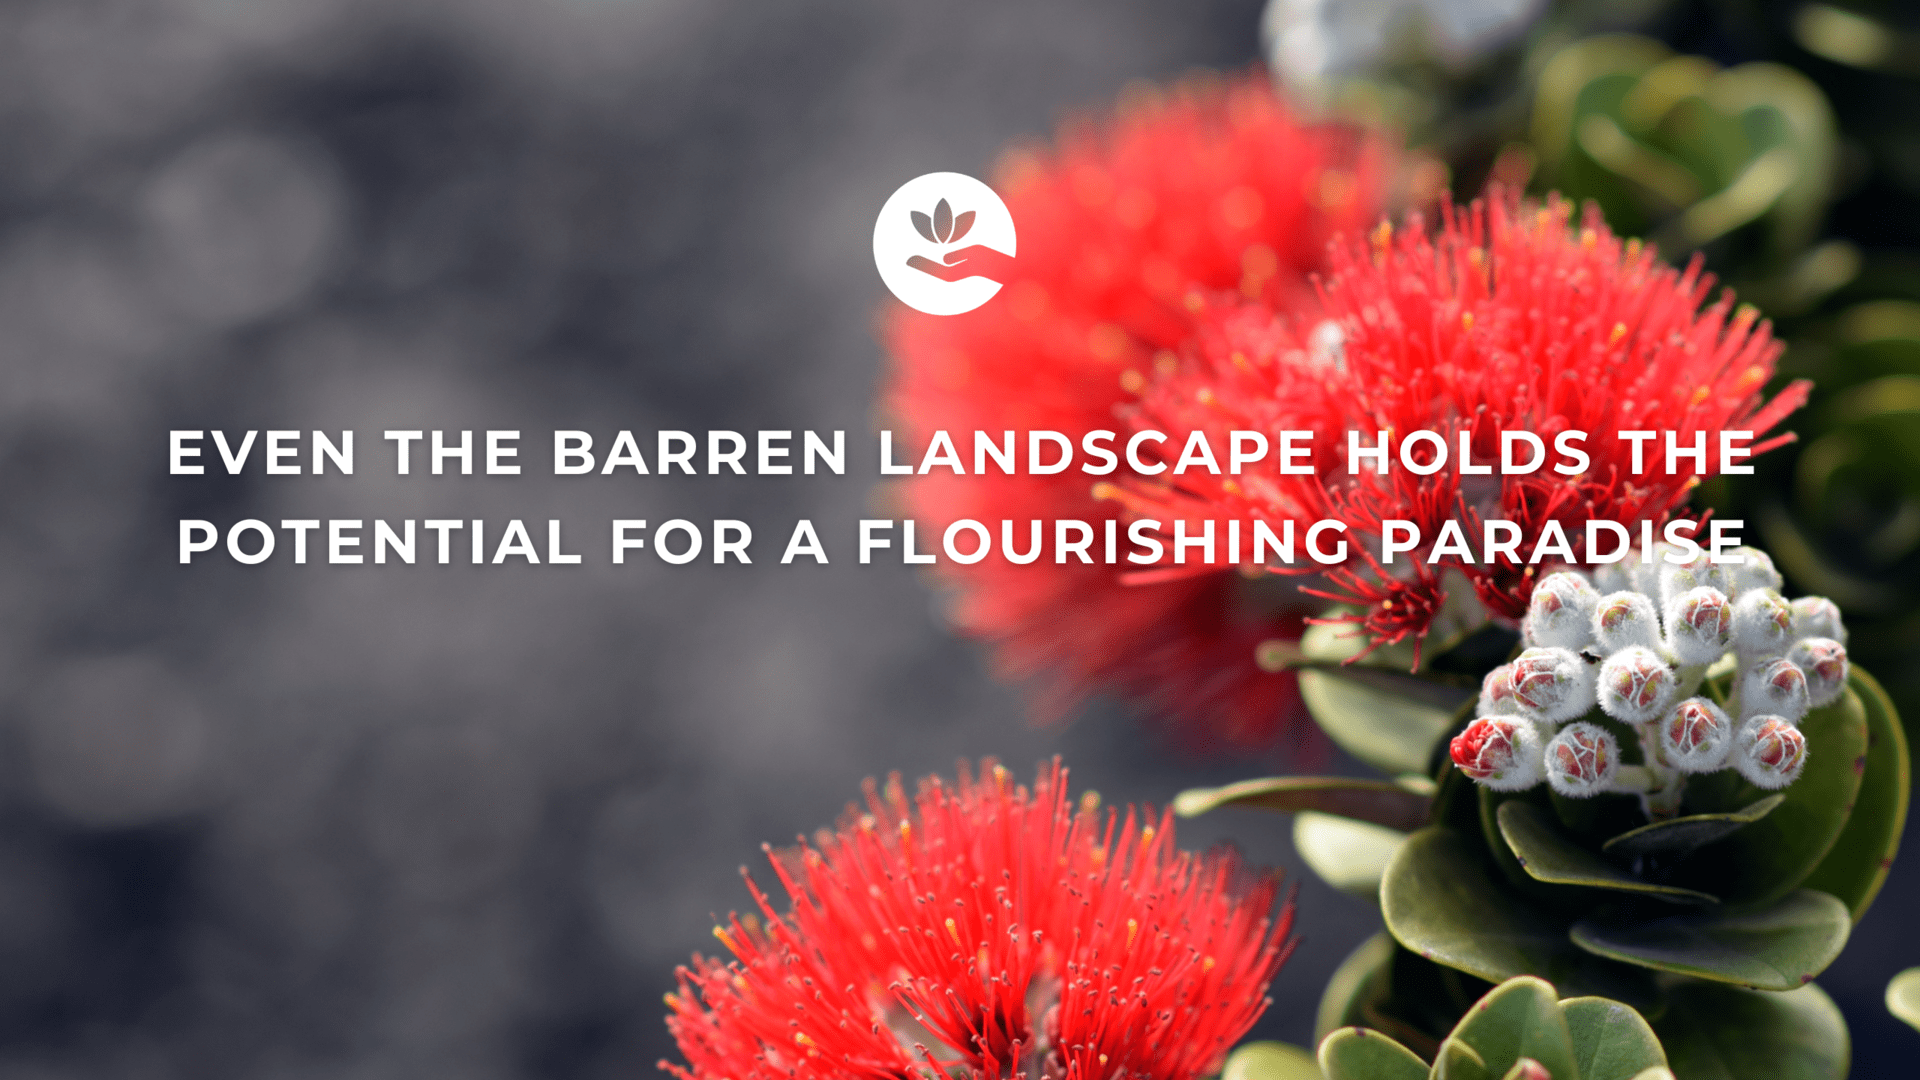 Even the barren landscape holds the potential for a flourishing paradise